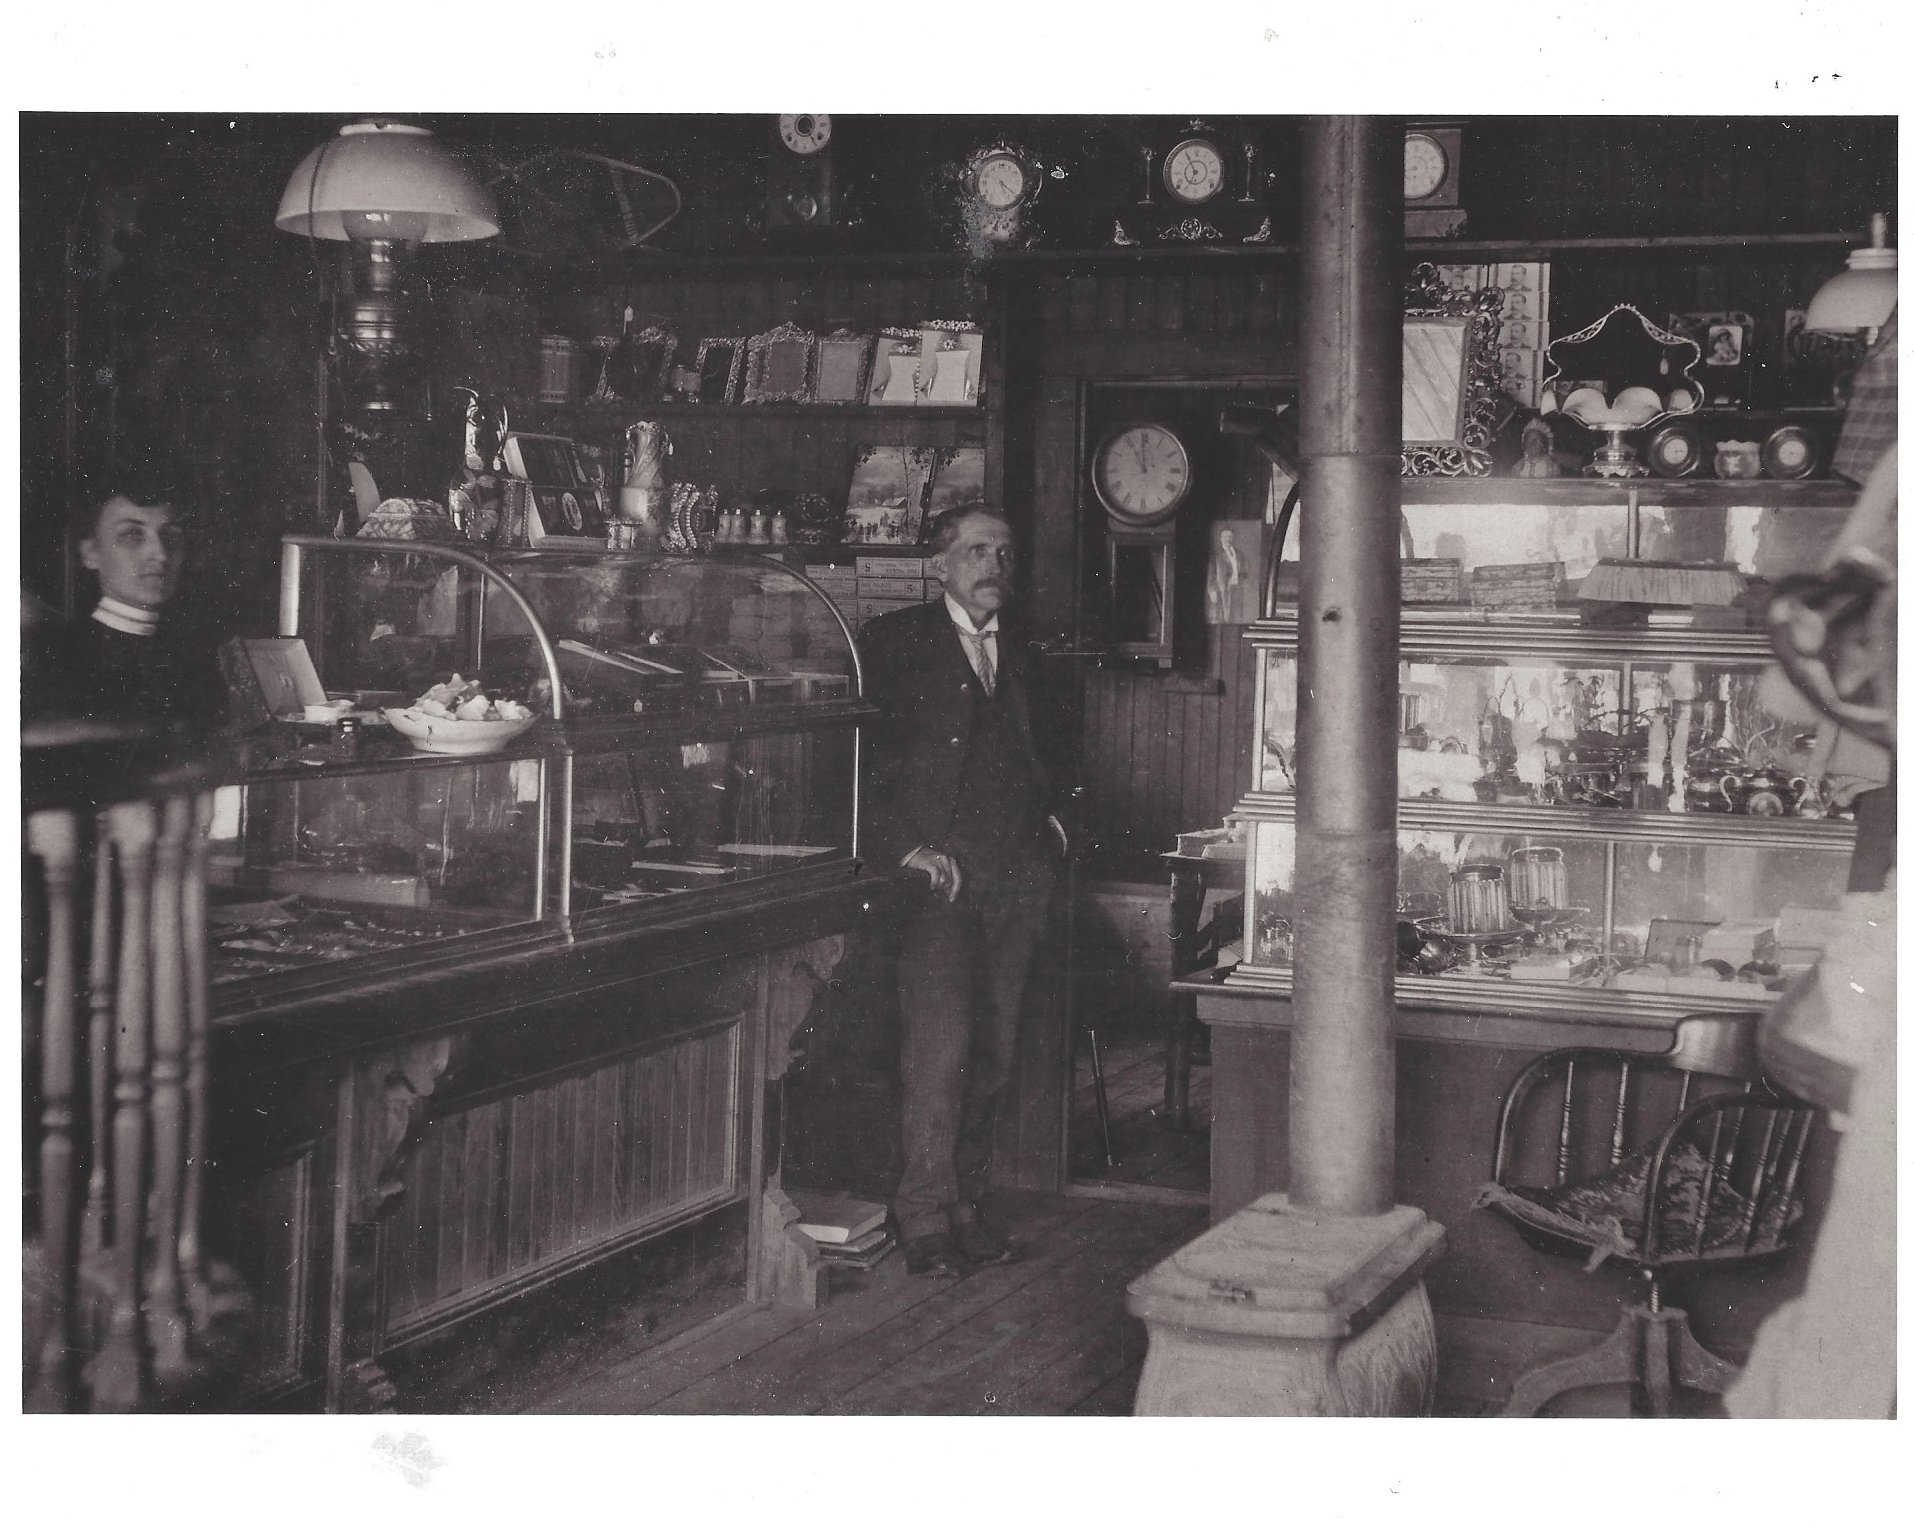 The Birch Store counter in the 1890s